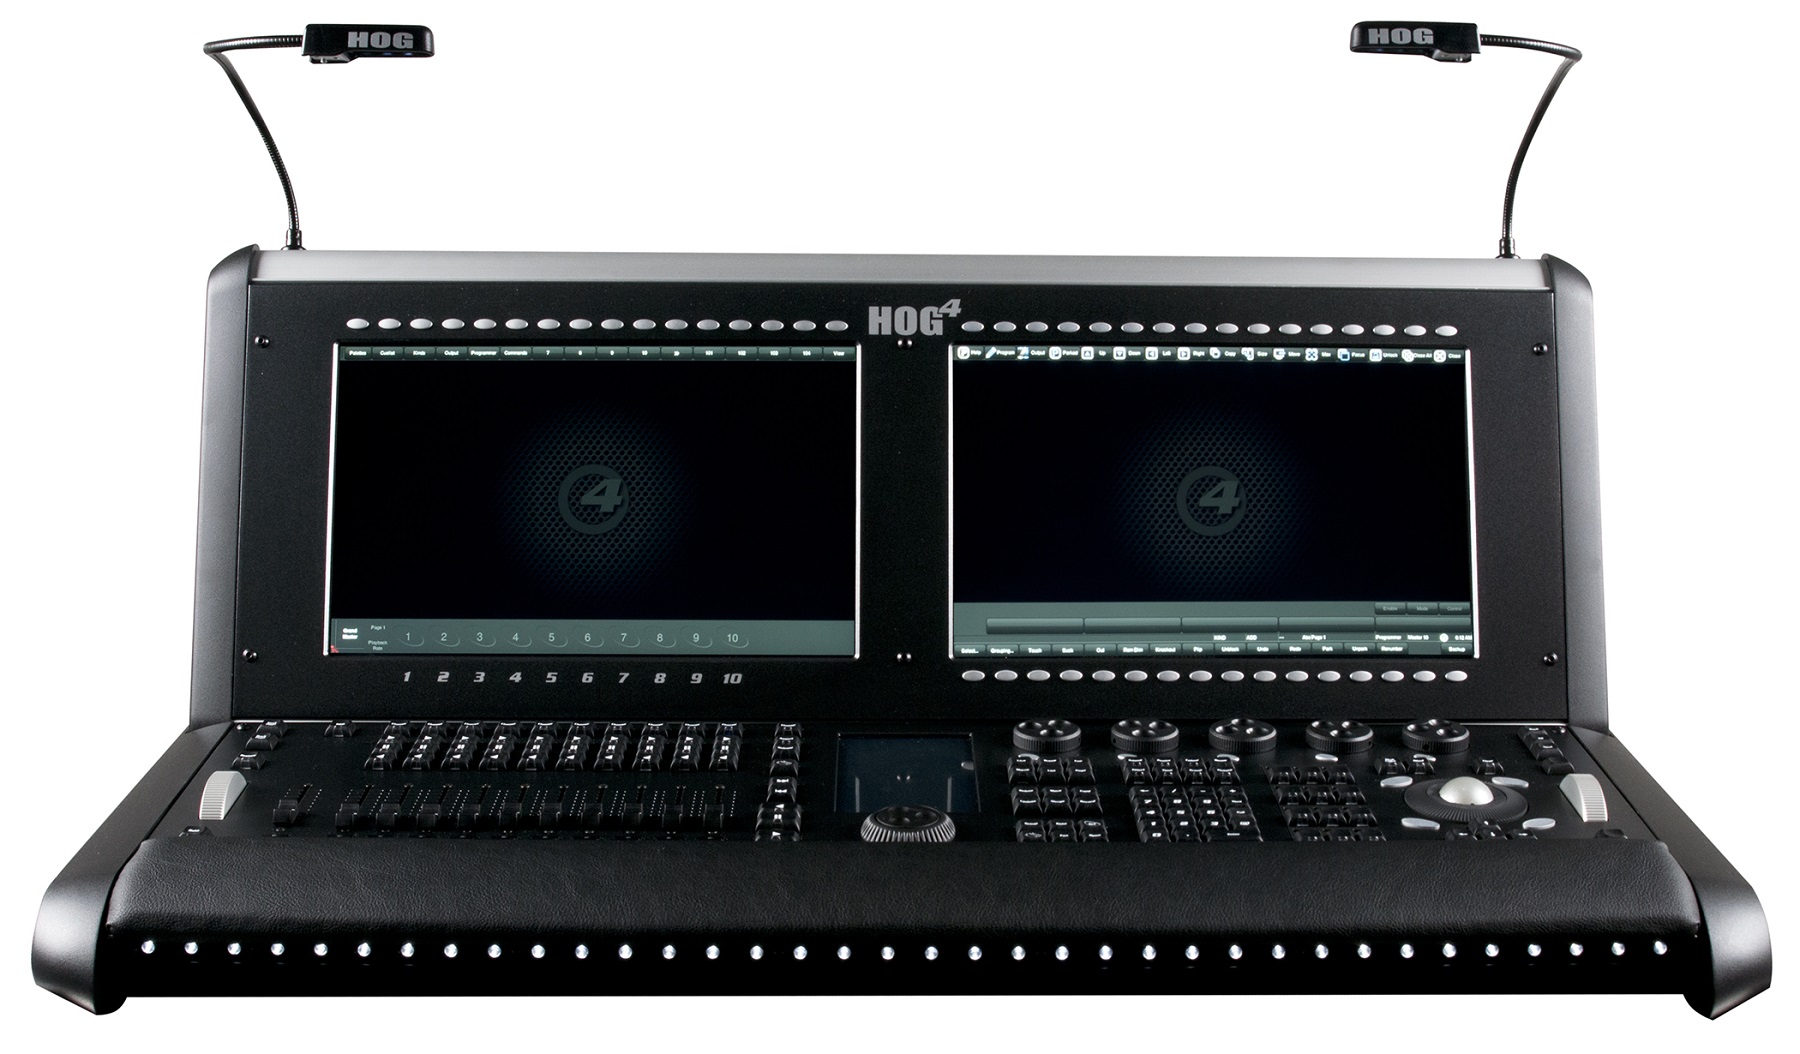 Elation Professional Expands to Offer Entire High End Systems Hog 4 Range of Lighting Consoles to their U.S.-Reseller NetworkGallery Image high end systems hog 4 